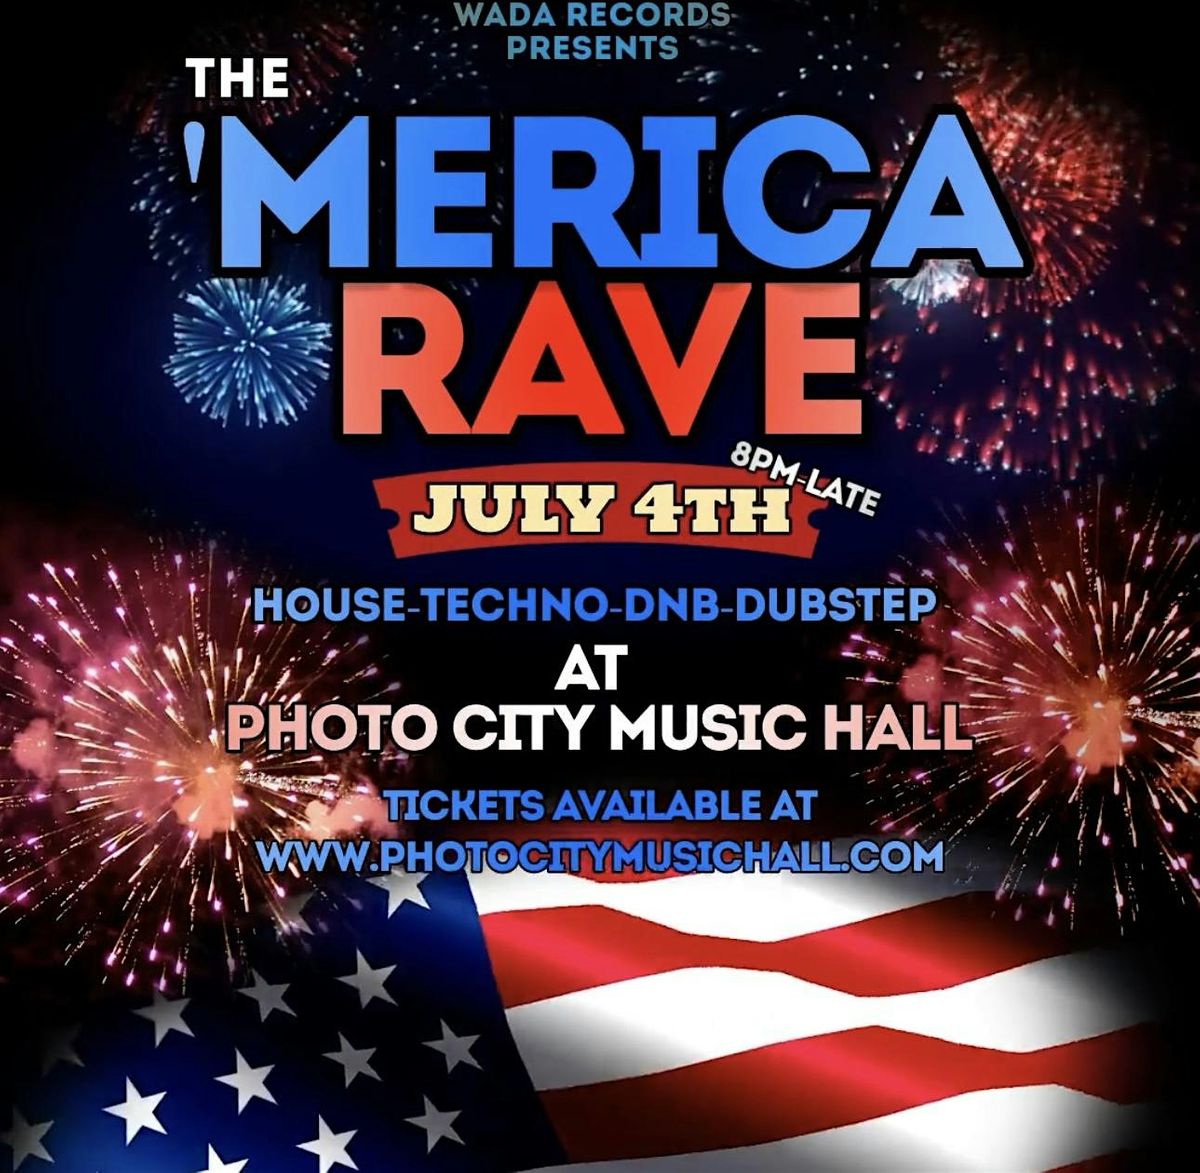 The 'Merica Rave - Rochester, NY